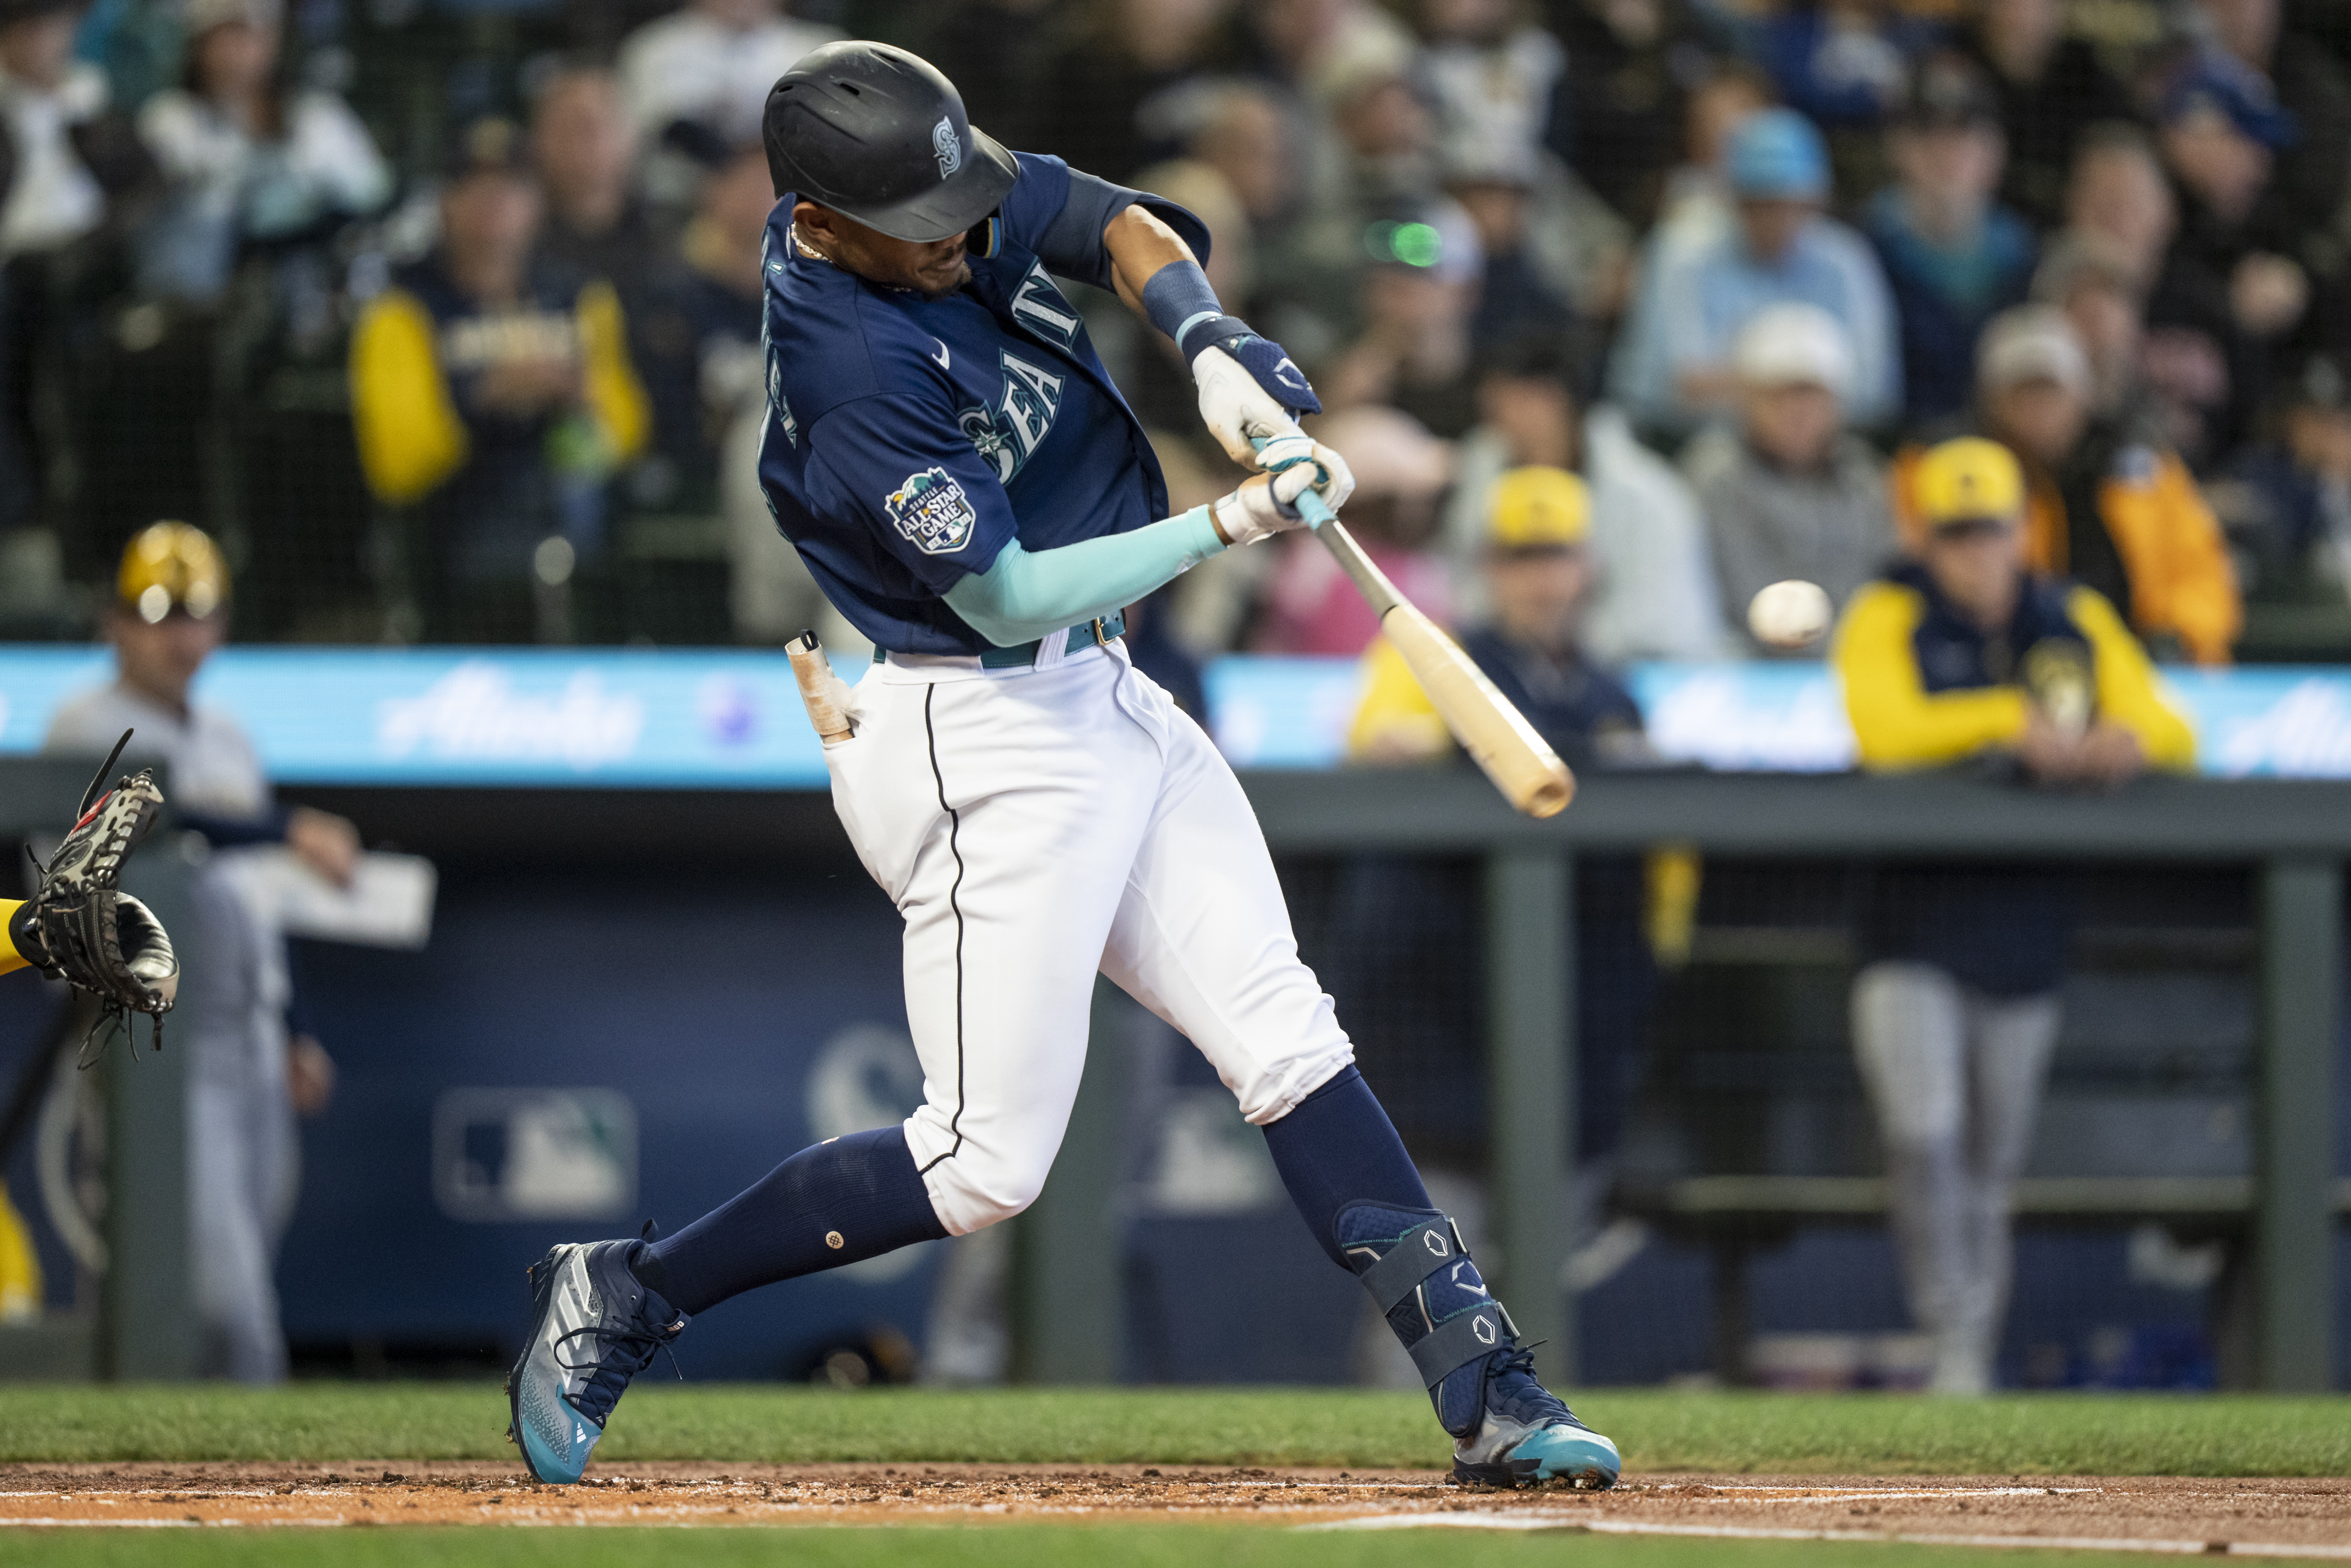 Brewers defeat Mariners 5-3